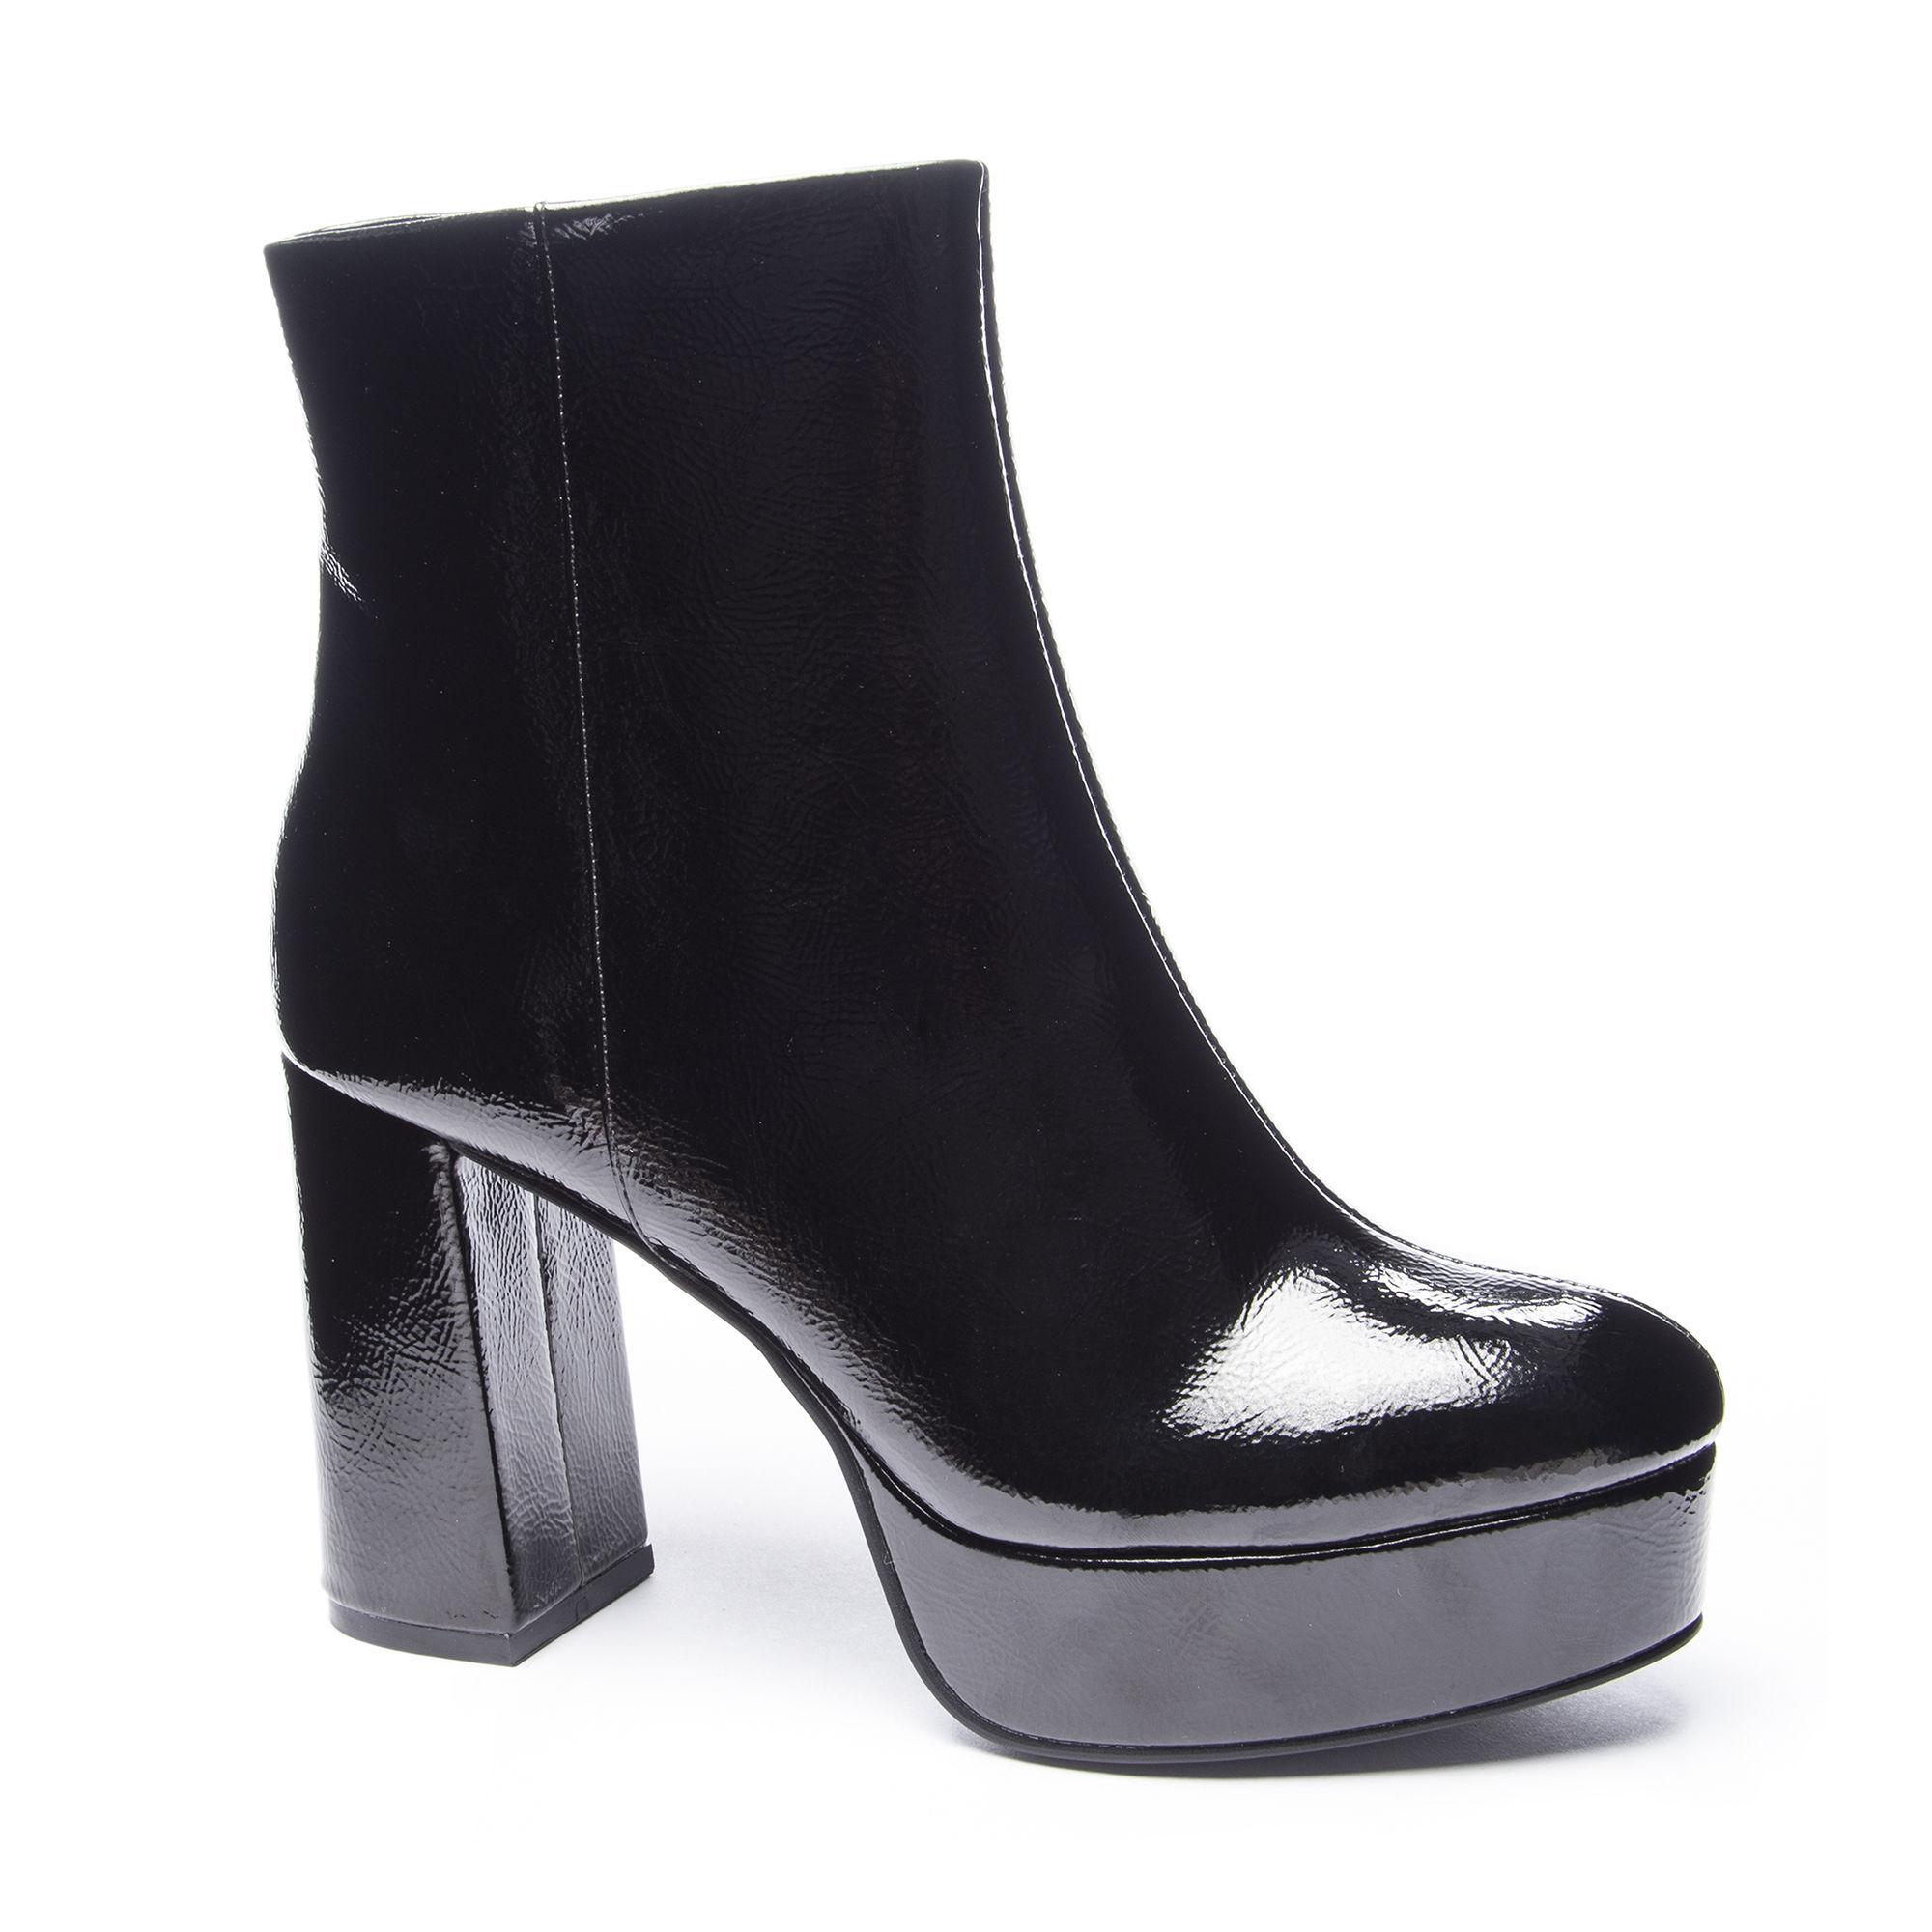 Chinese Laundry Nenna Platform Bootie in Black - Lyst